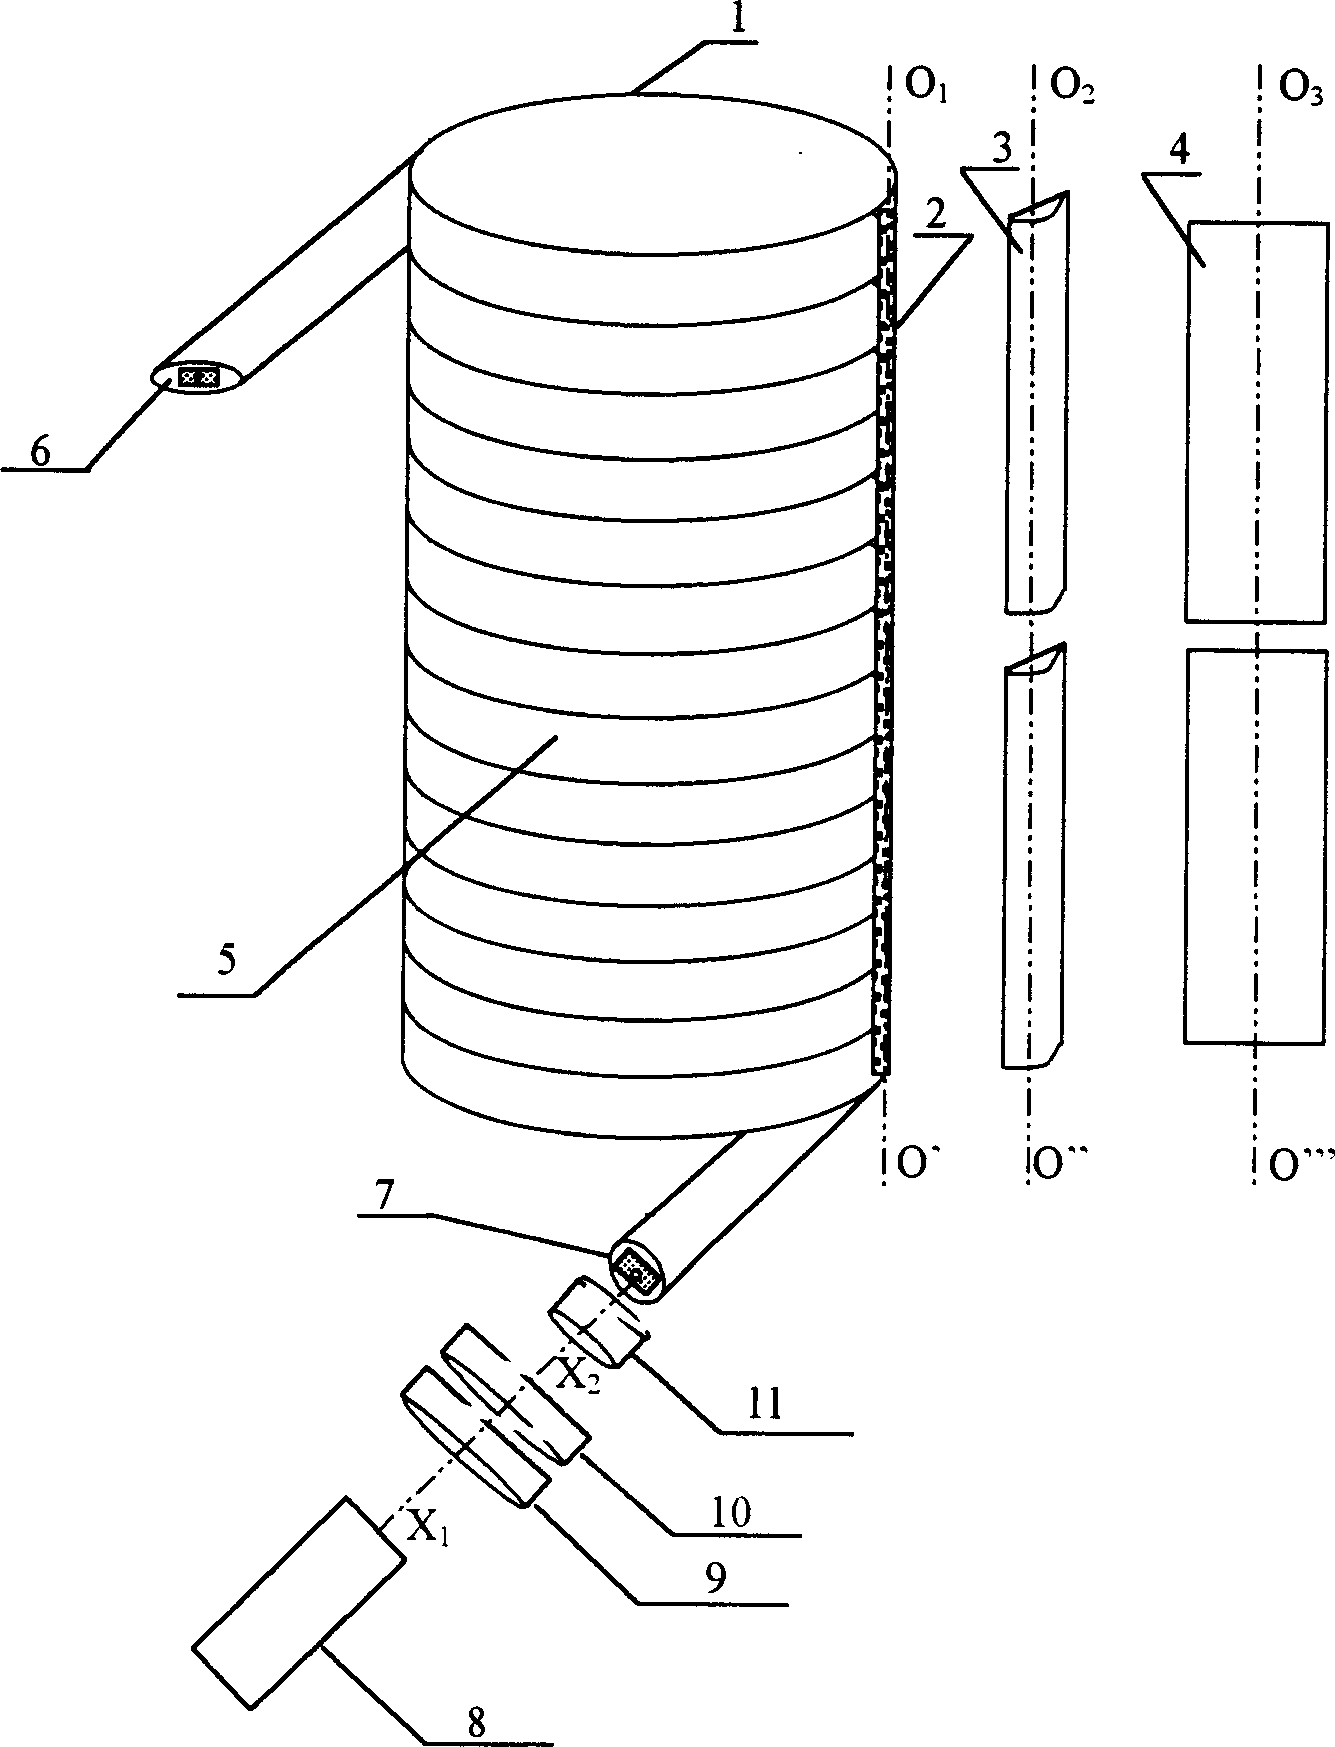 Cylindrical-arranged pluse double-clad optical fibre amplifiers